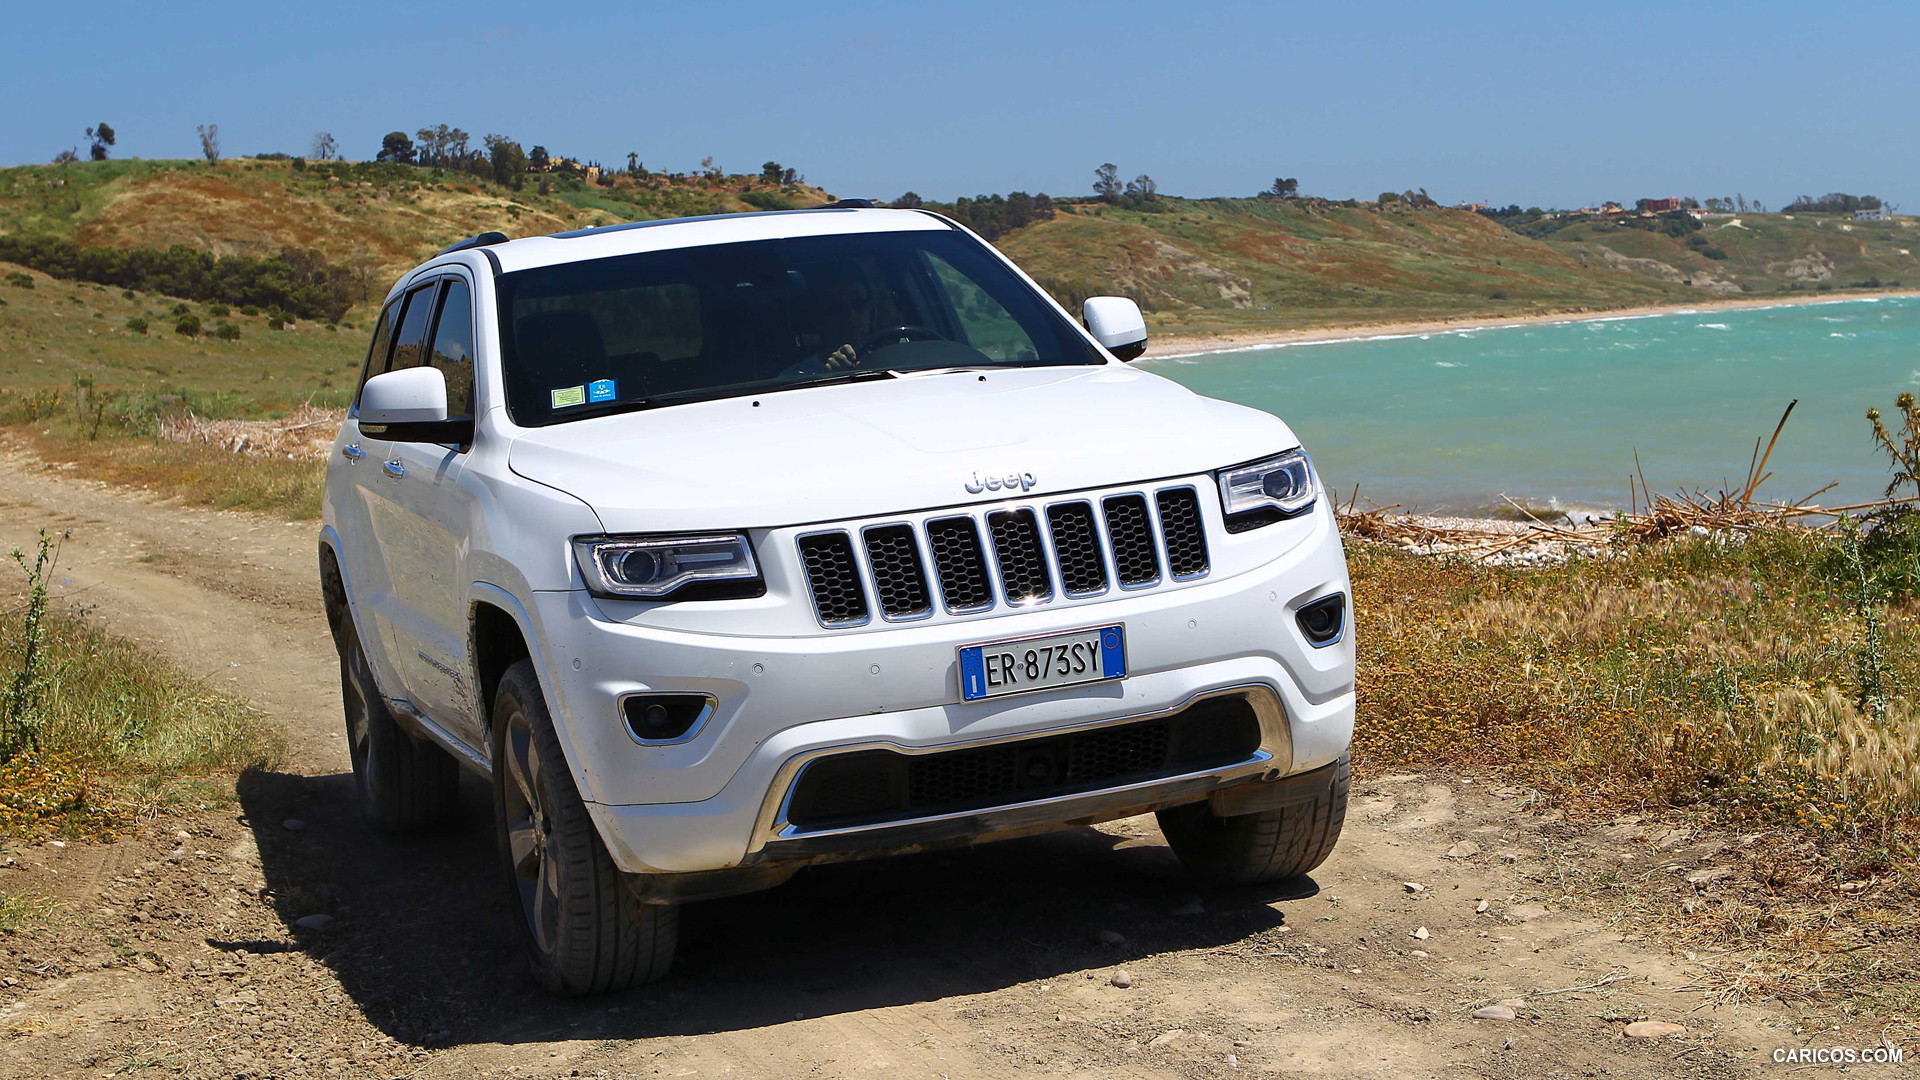 Download Jeep Grand Cherokee EU-Version photo #108650) You can use this pic as wallpaper ...